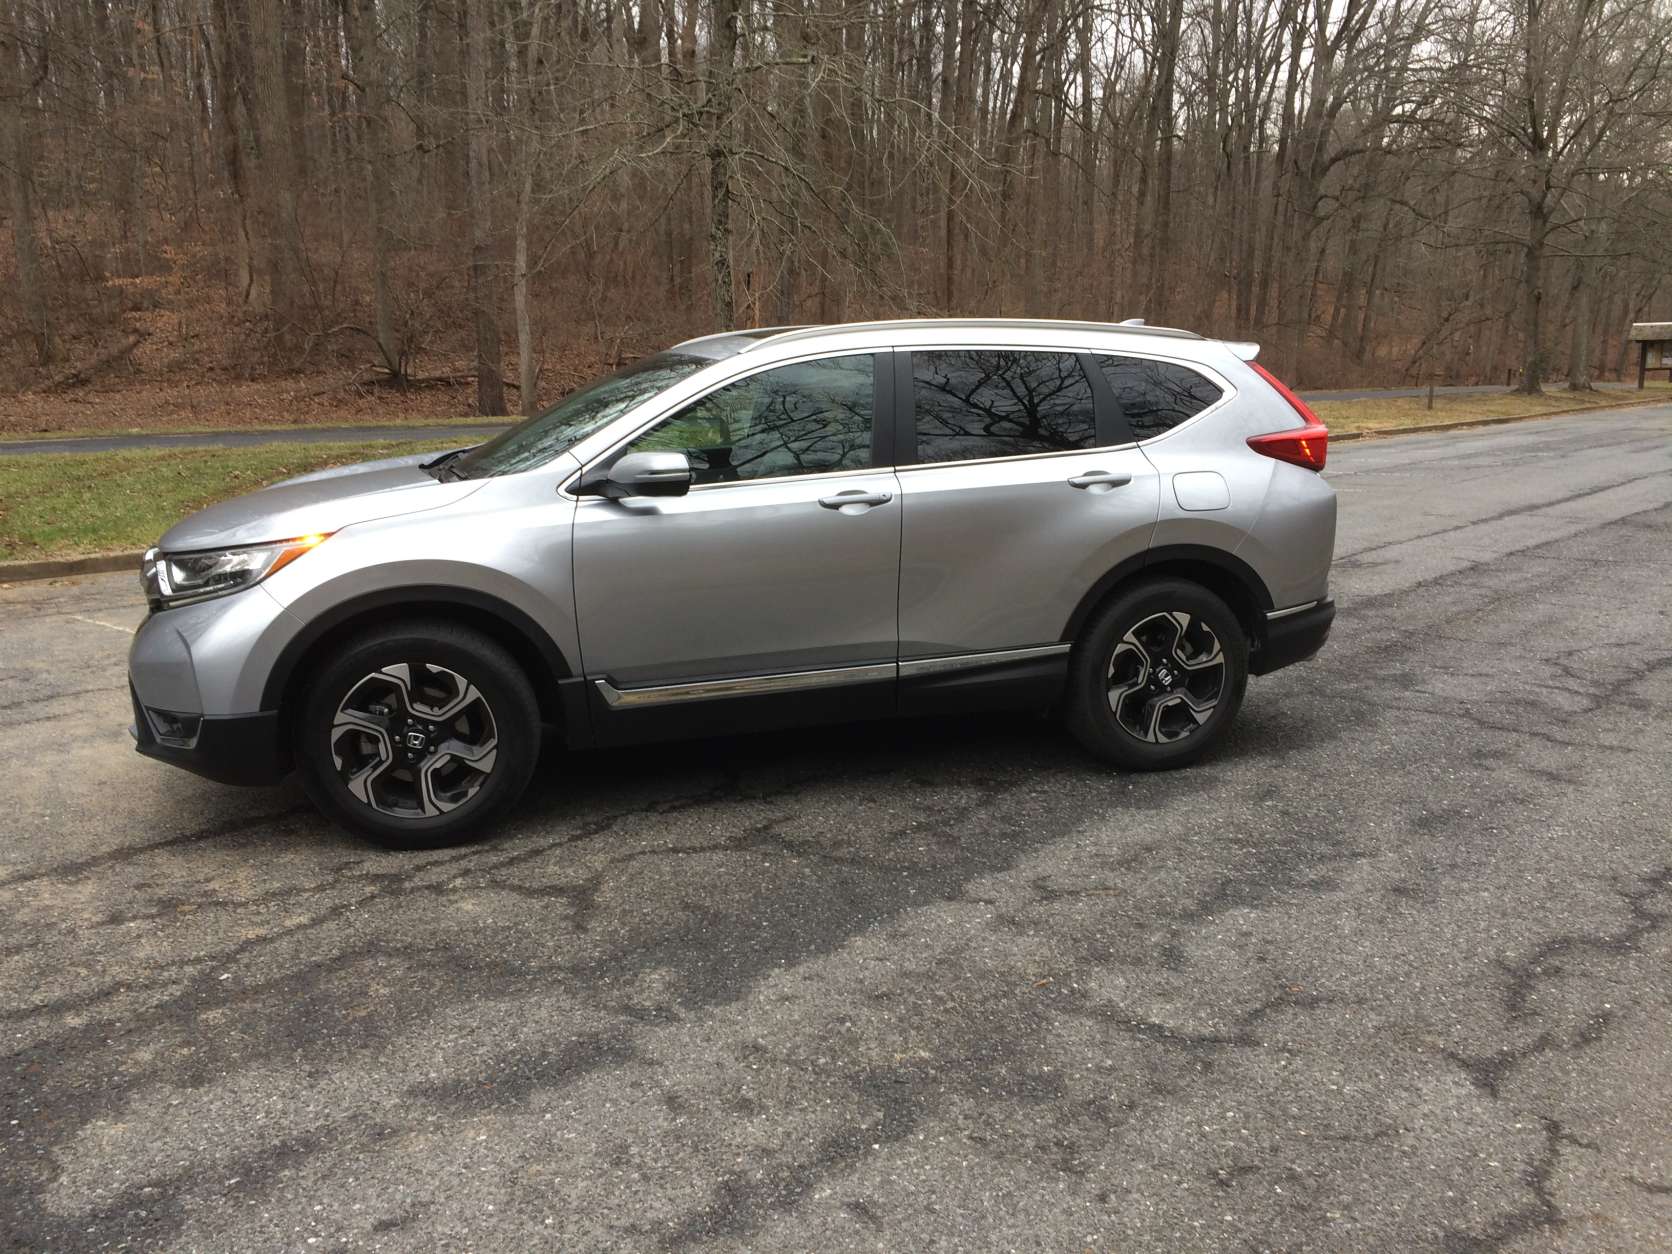 Even when looking at the side of the new Honda CR-V, it looks more modern with flared wheel arches and larger 18-inch wheels that are very stylish for a crossover. (WTOP/Mike Parris)